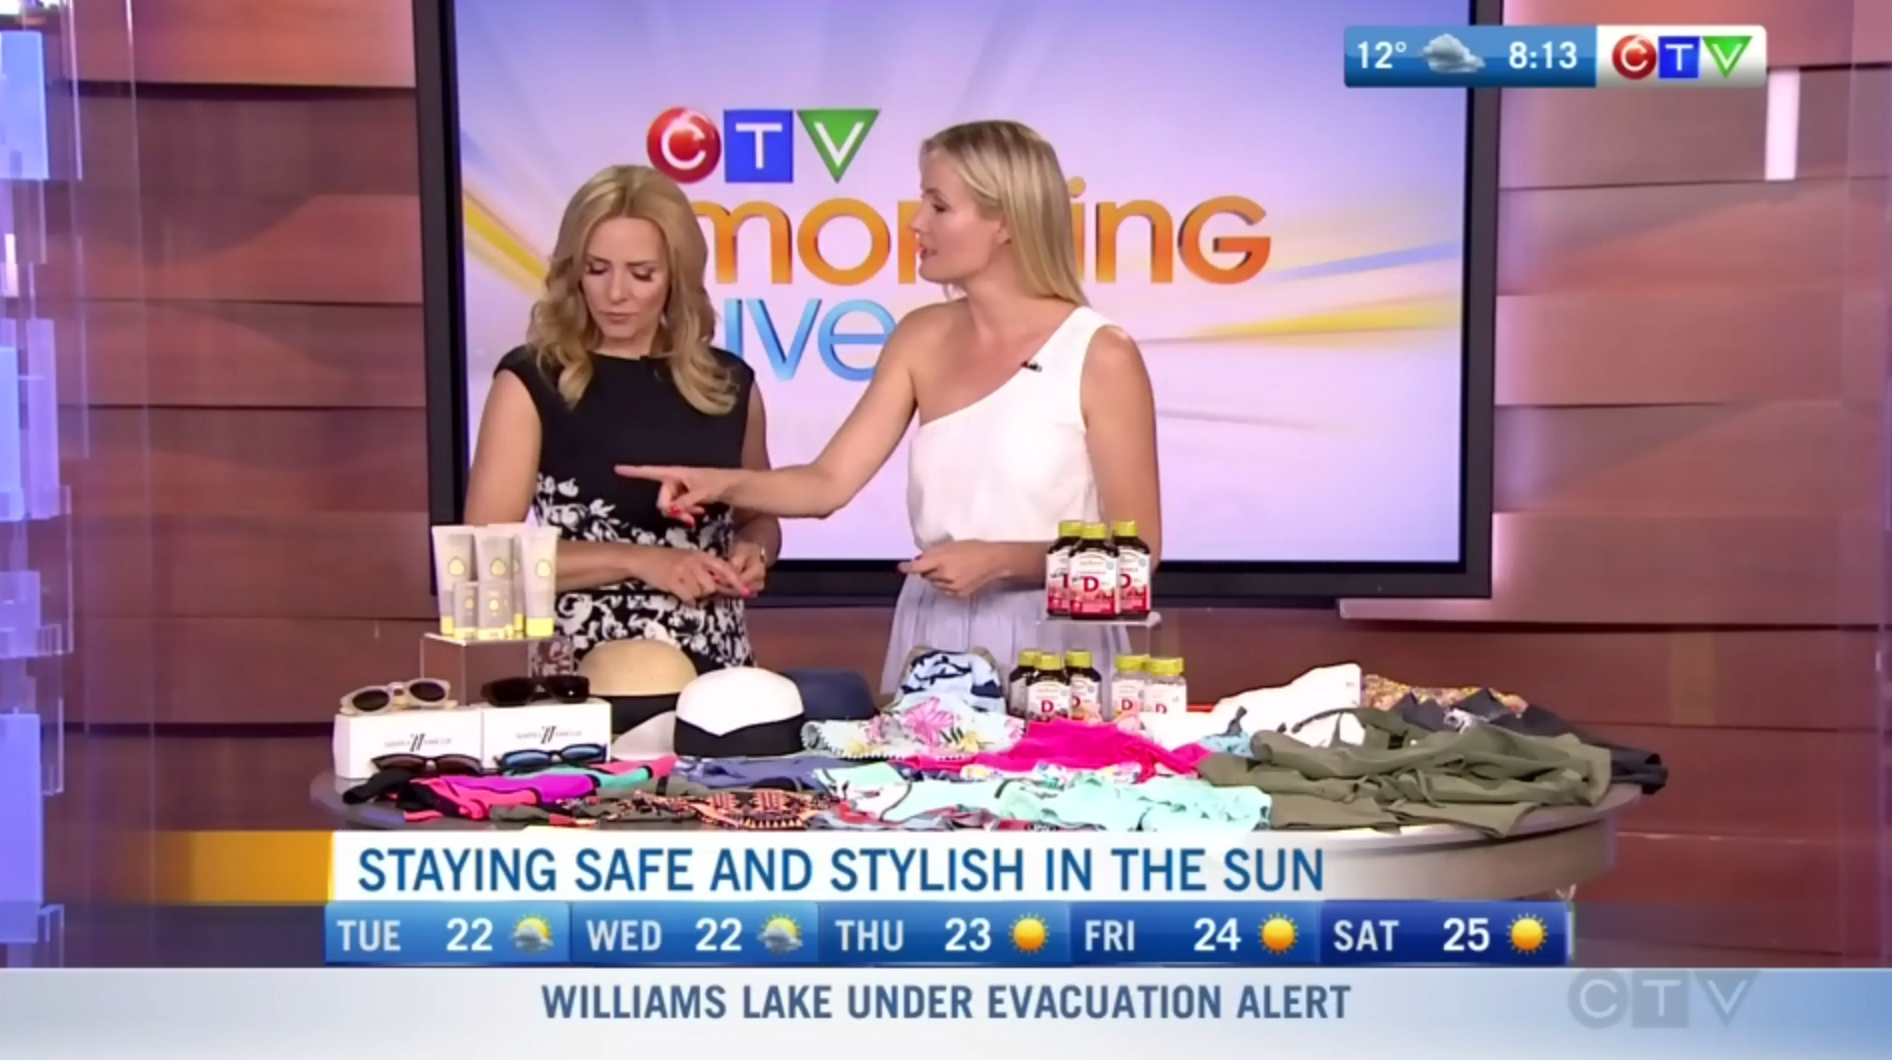 Staying Safe and Stylish in the Sun – Good Morning News Halifax